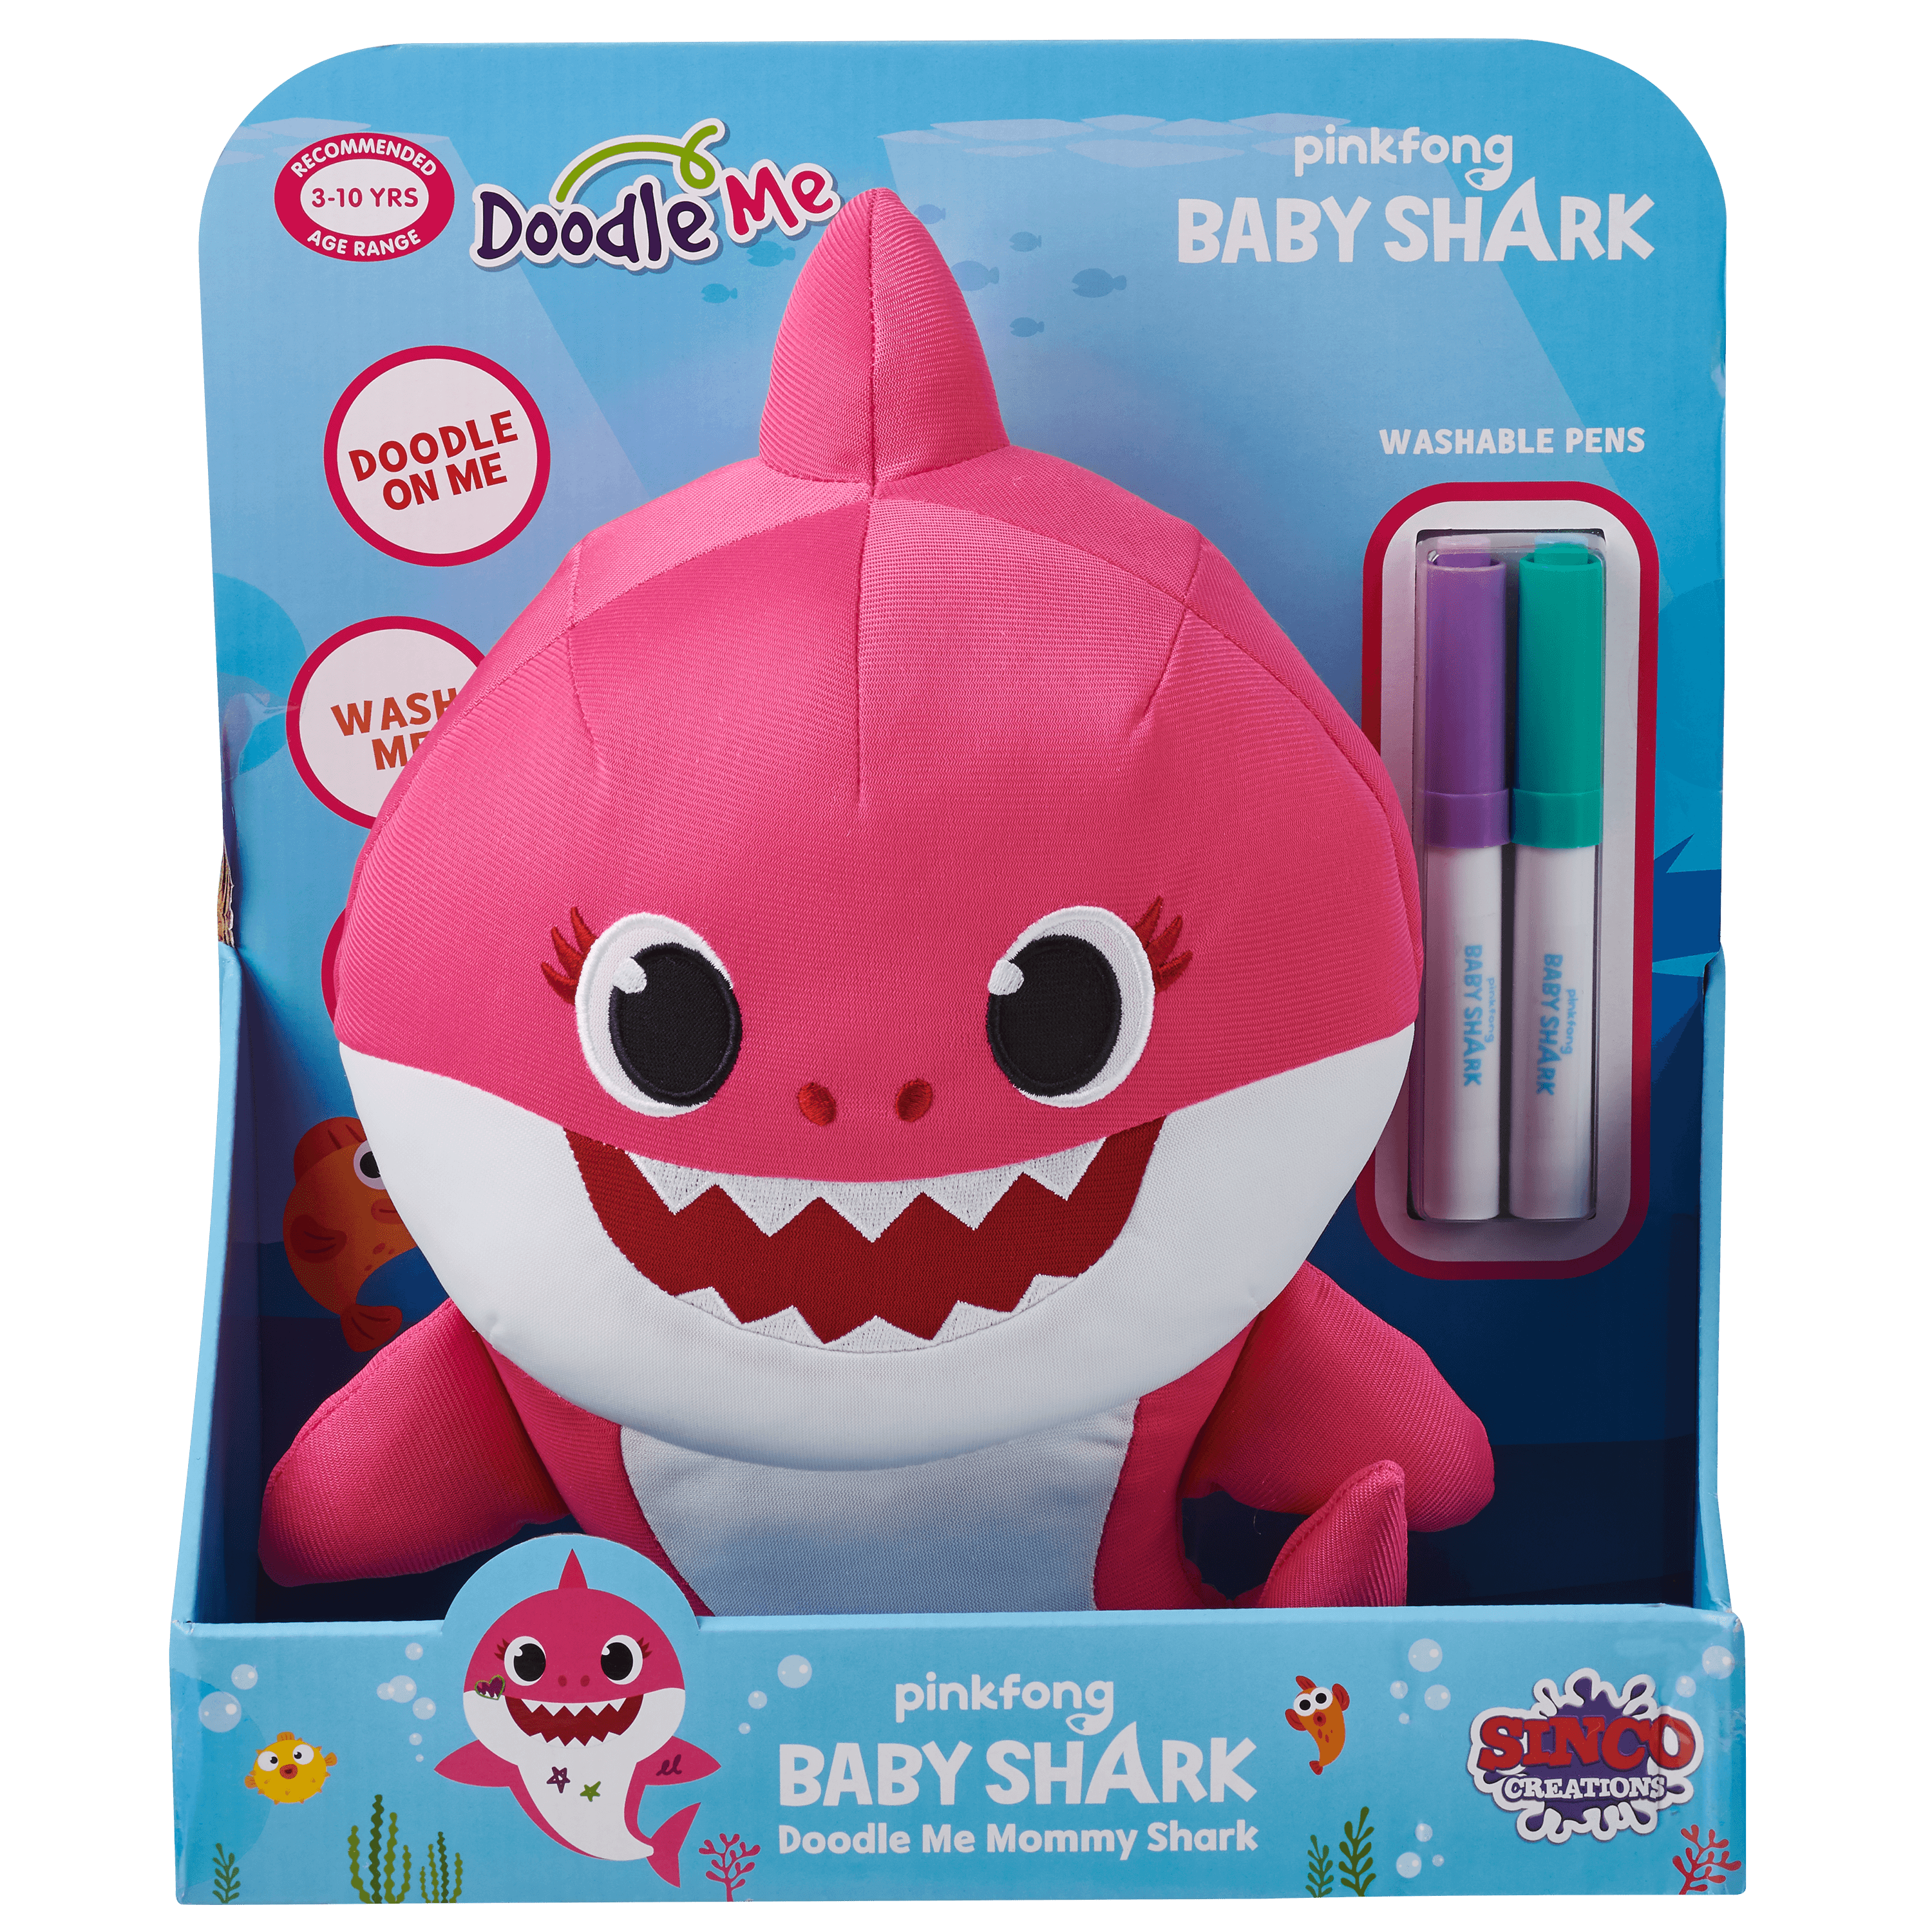 Pinkfong Mommy Shark Doodle & Wash Plush Doll - image 1 of 2